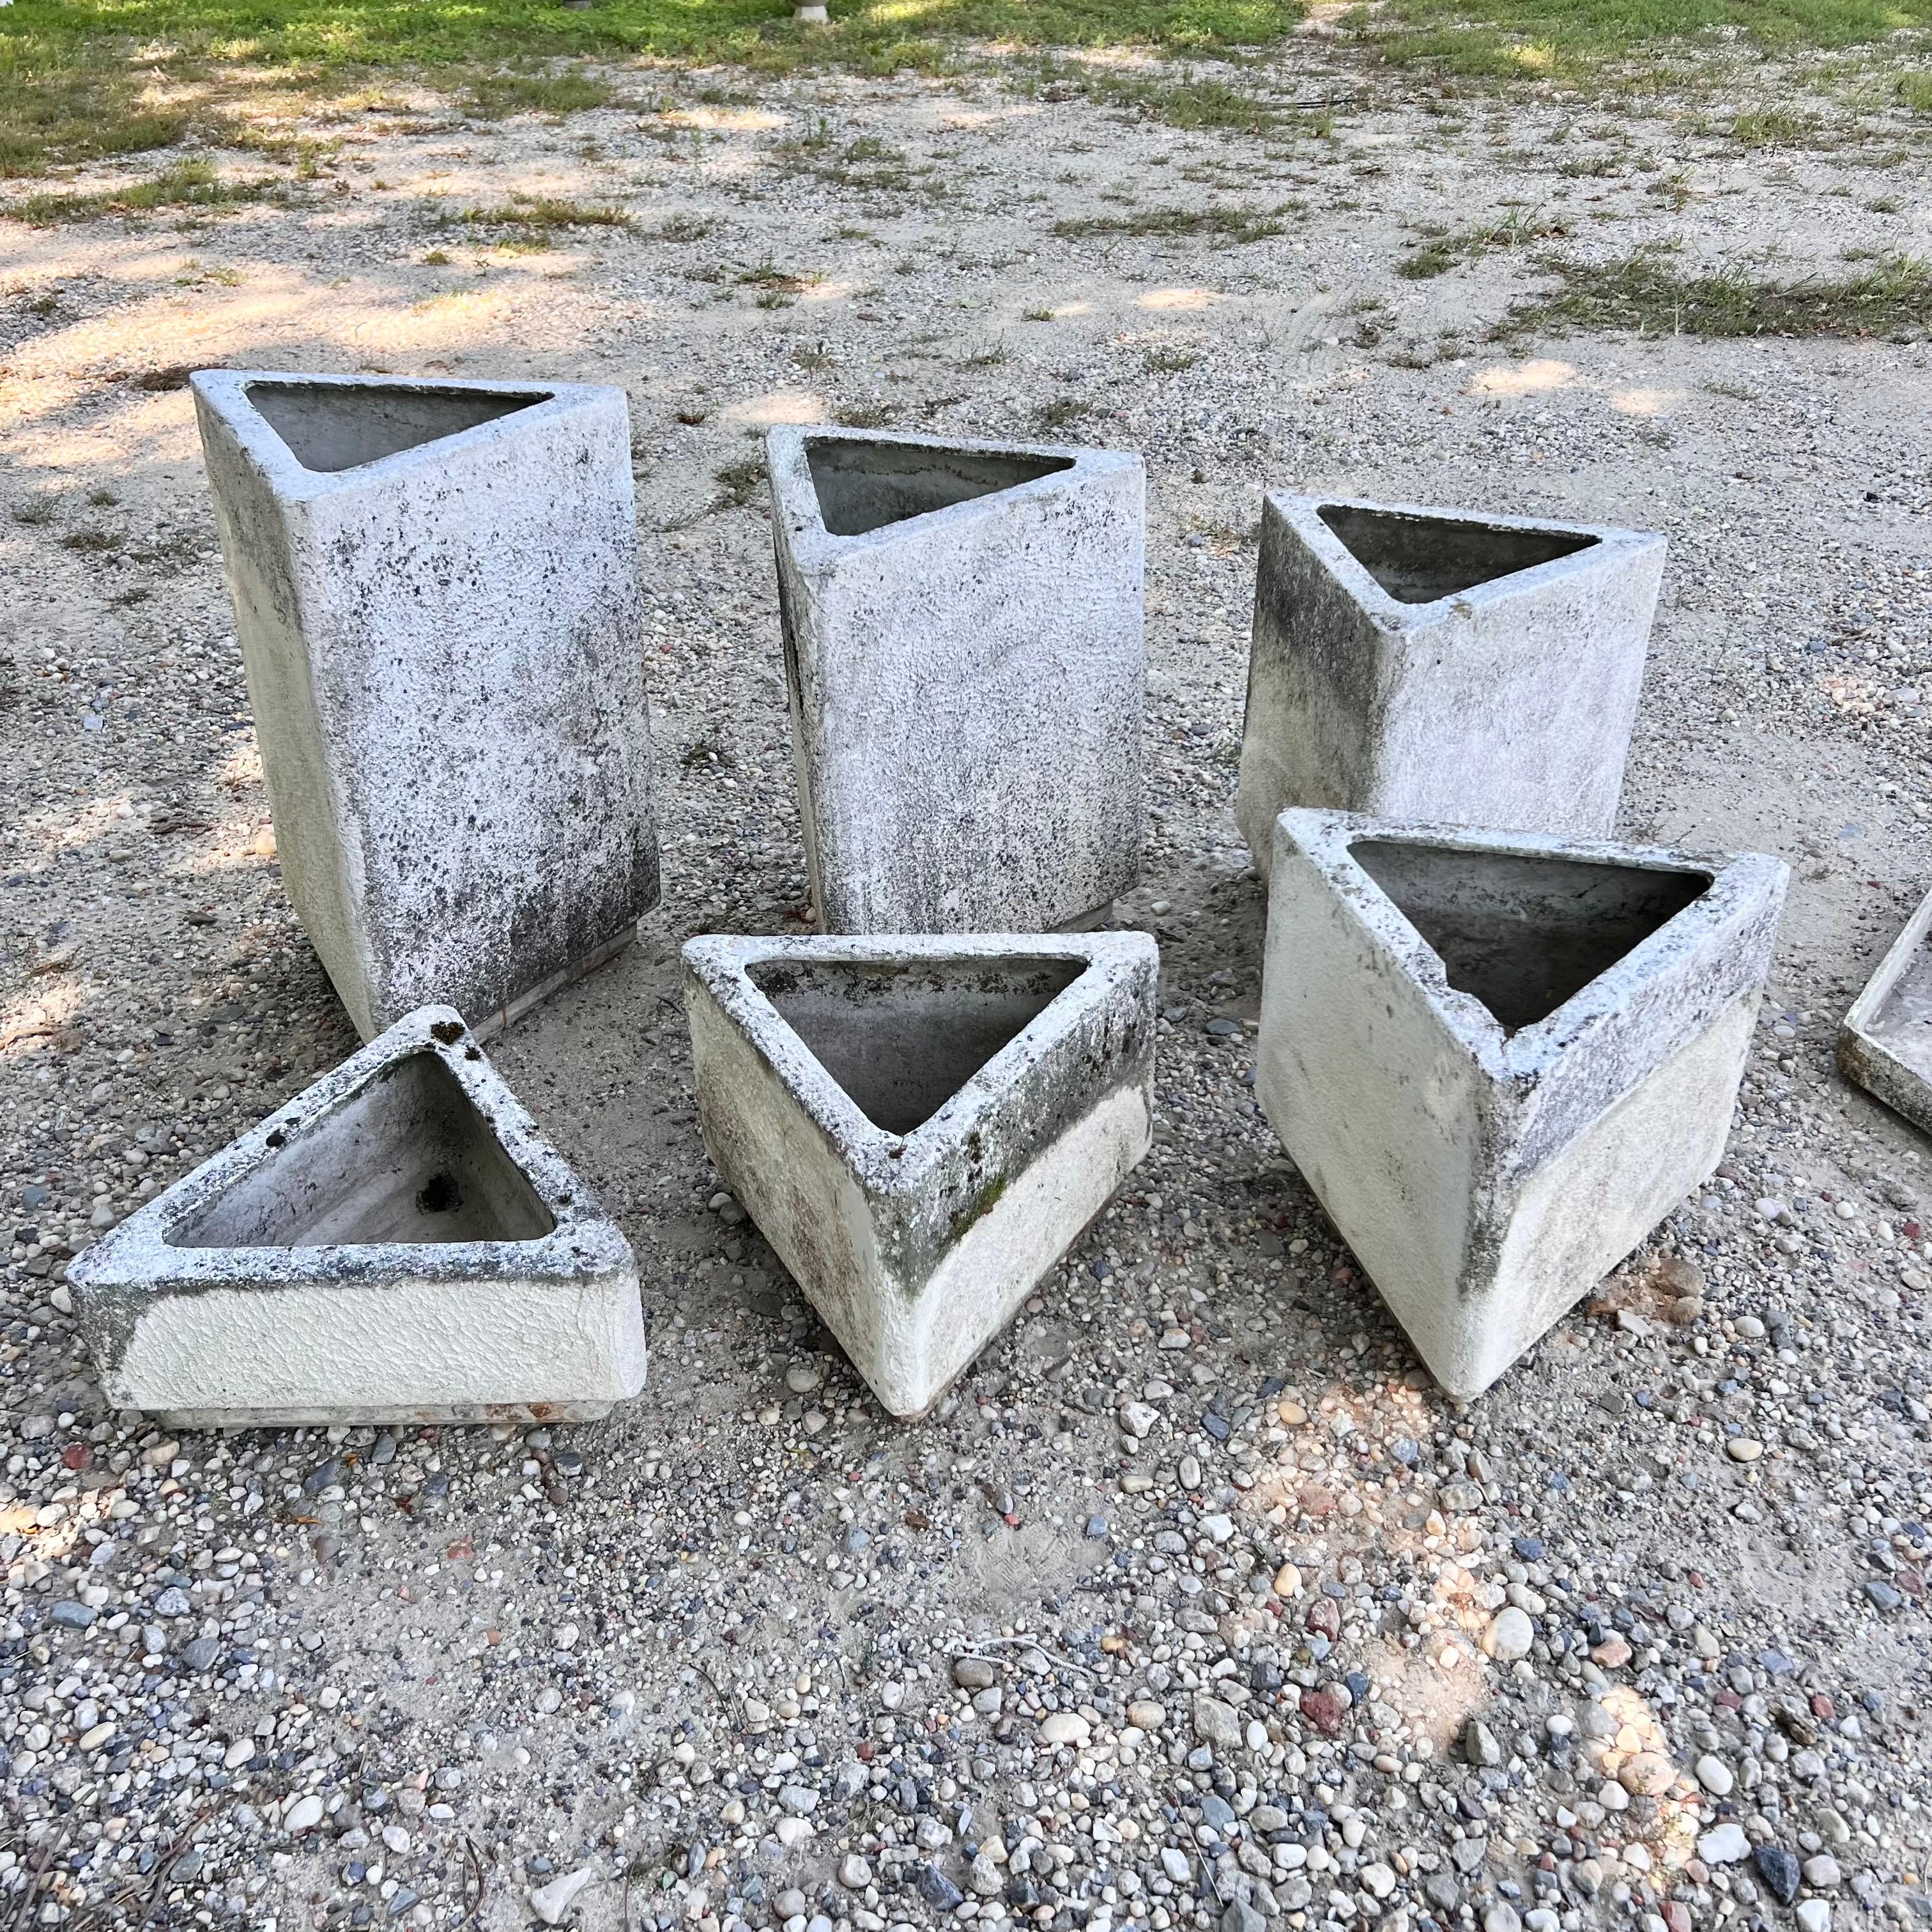 Complete set of 1970s triangular concrete planters designed by Swiss neo-functionalist and industrial design pioneer Willy Guhl for Eternit in Switzerland.

Each multifaceted planter can be arranged in a multitude of ways. Each triangle is the same